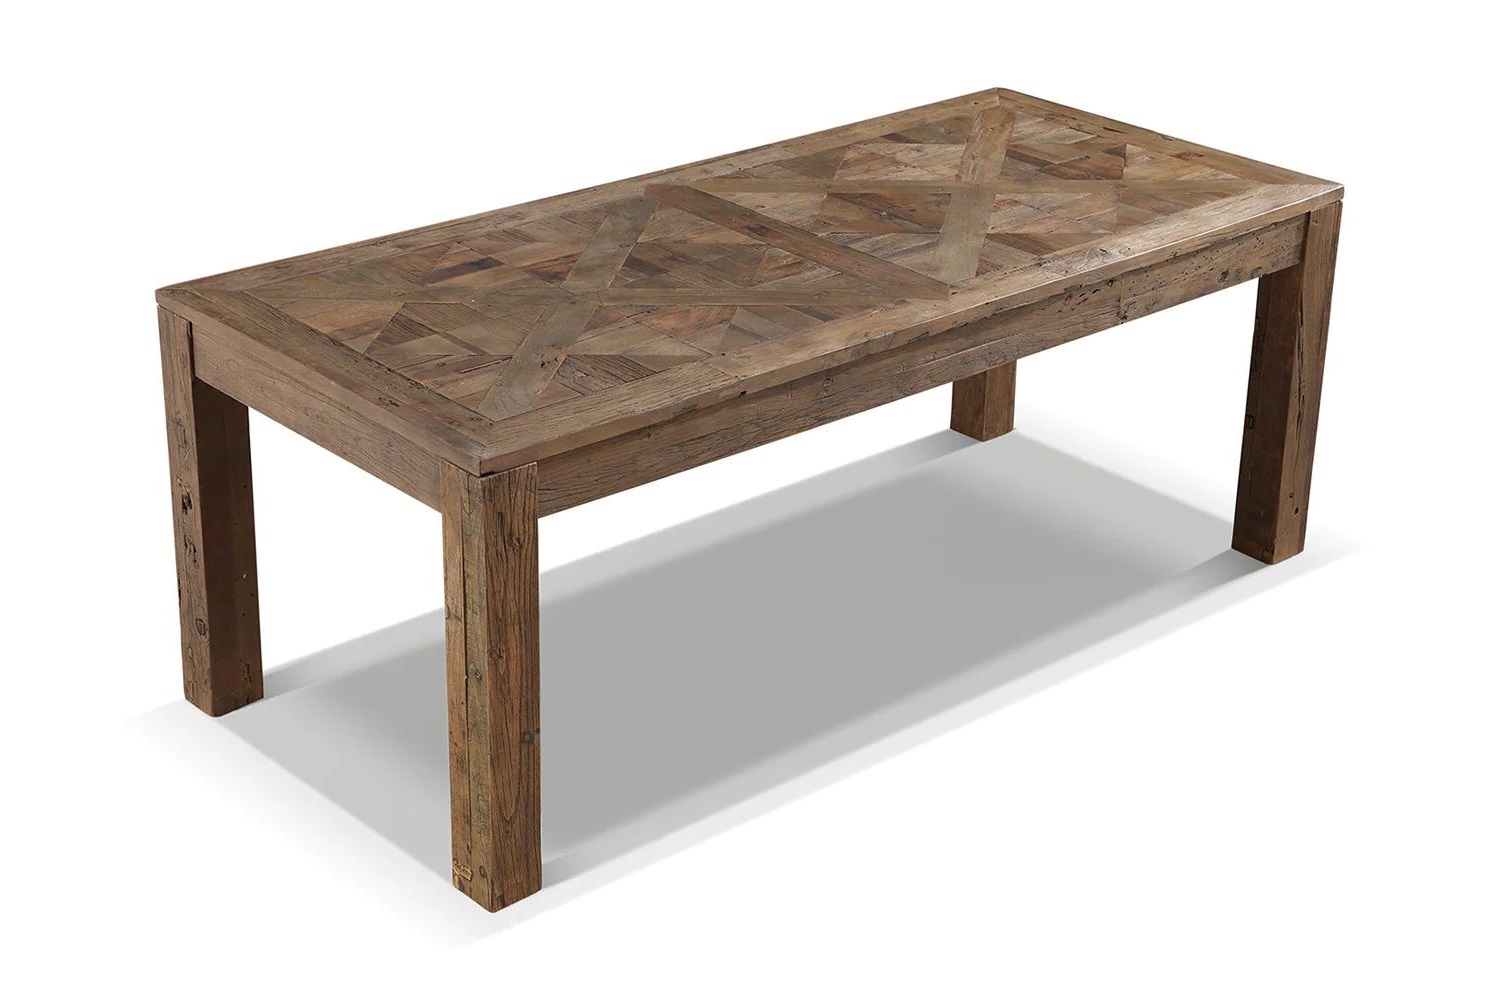 Rustic Dining Table In Raw Wood 